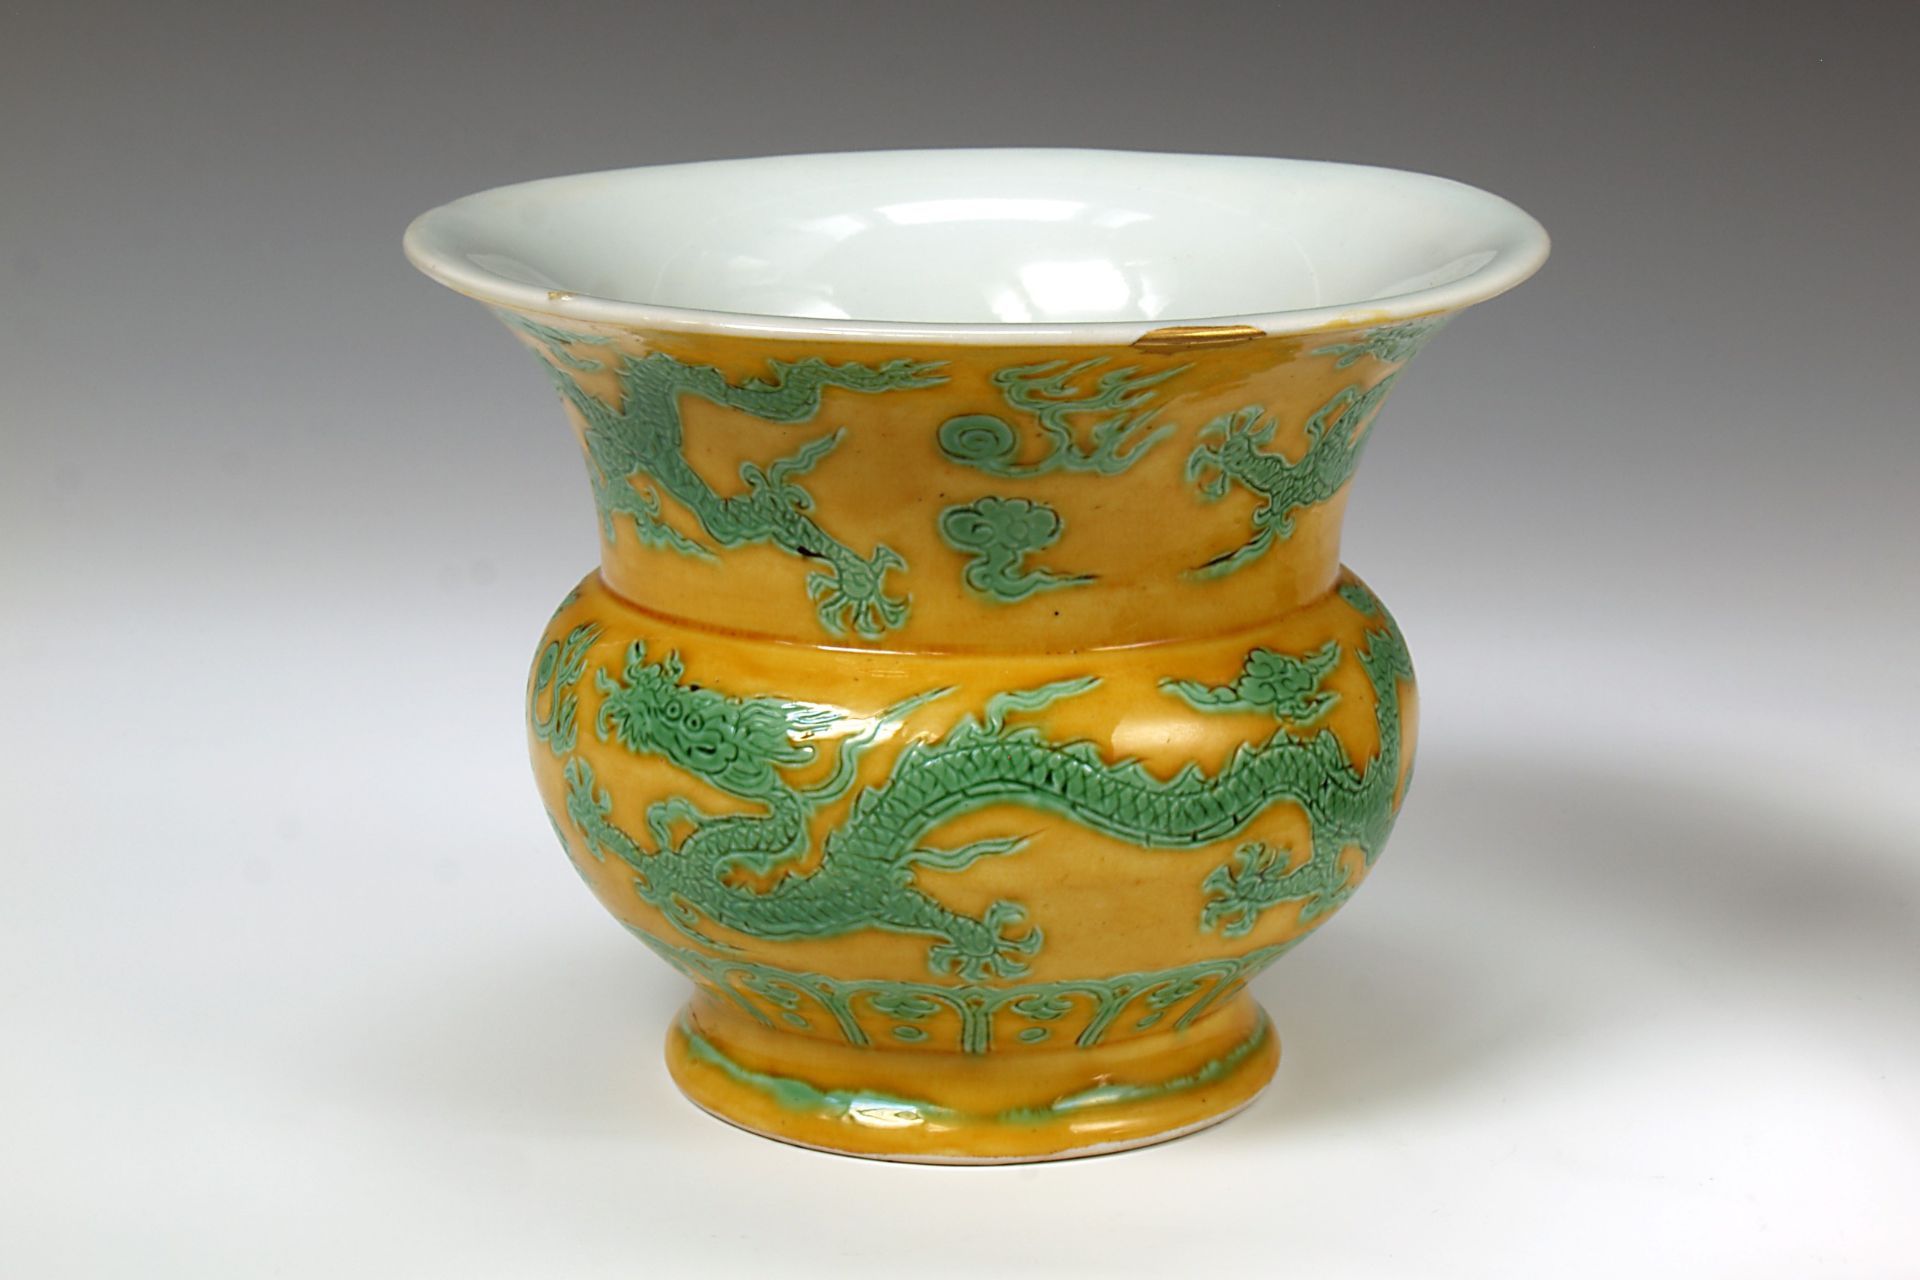 Ming dynasty imperial concubine’s spittoon